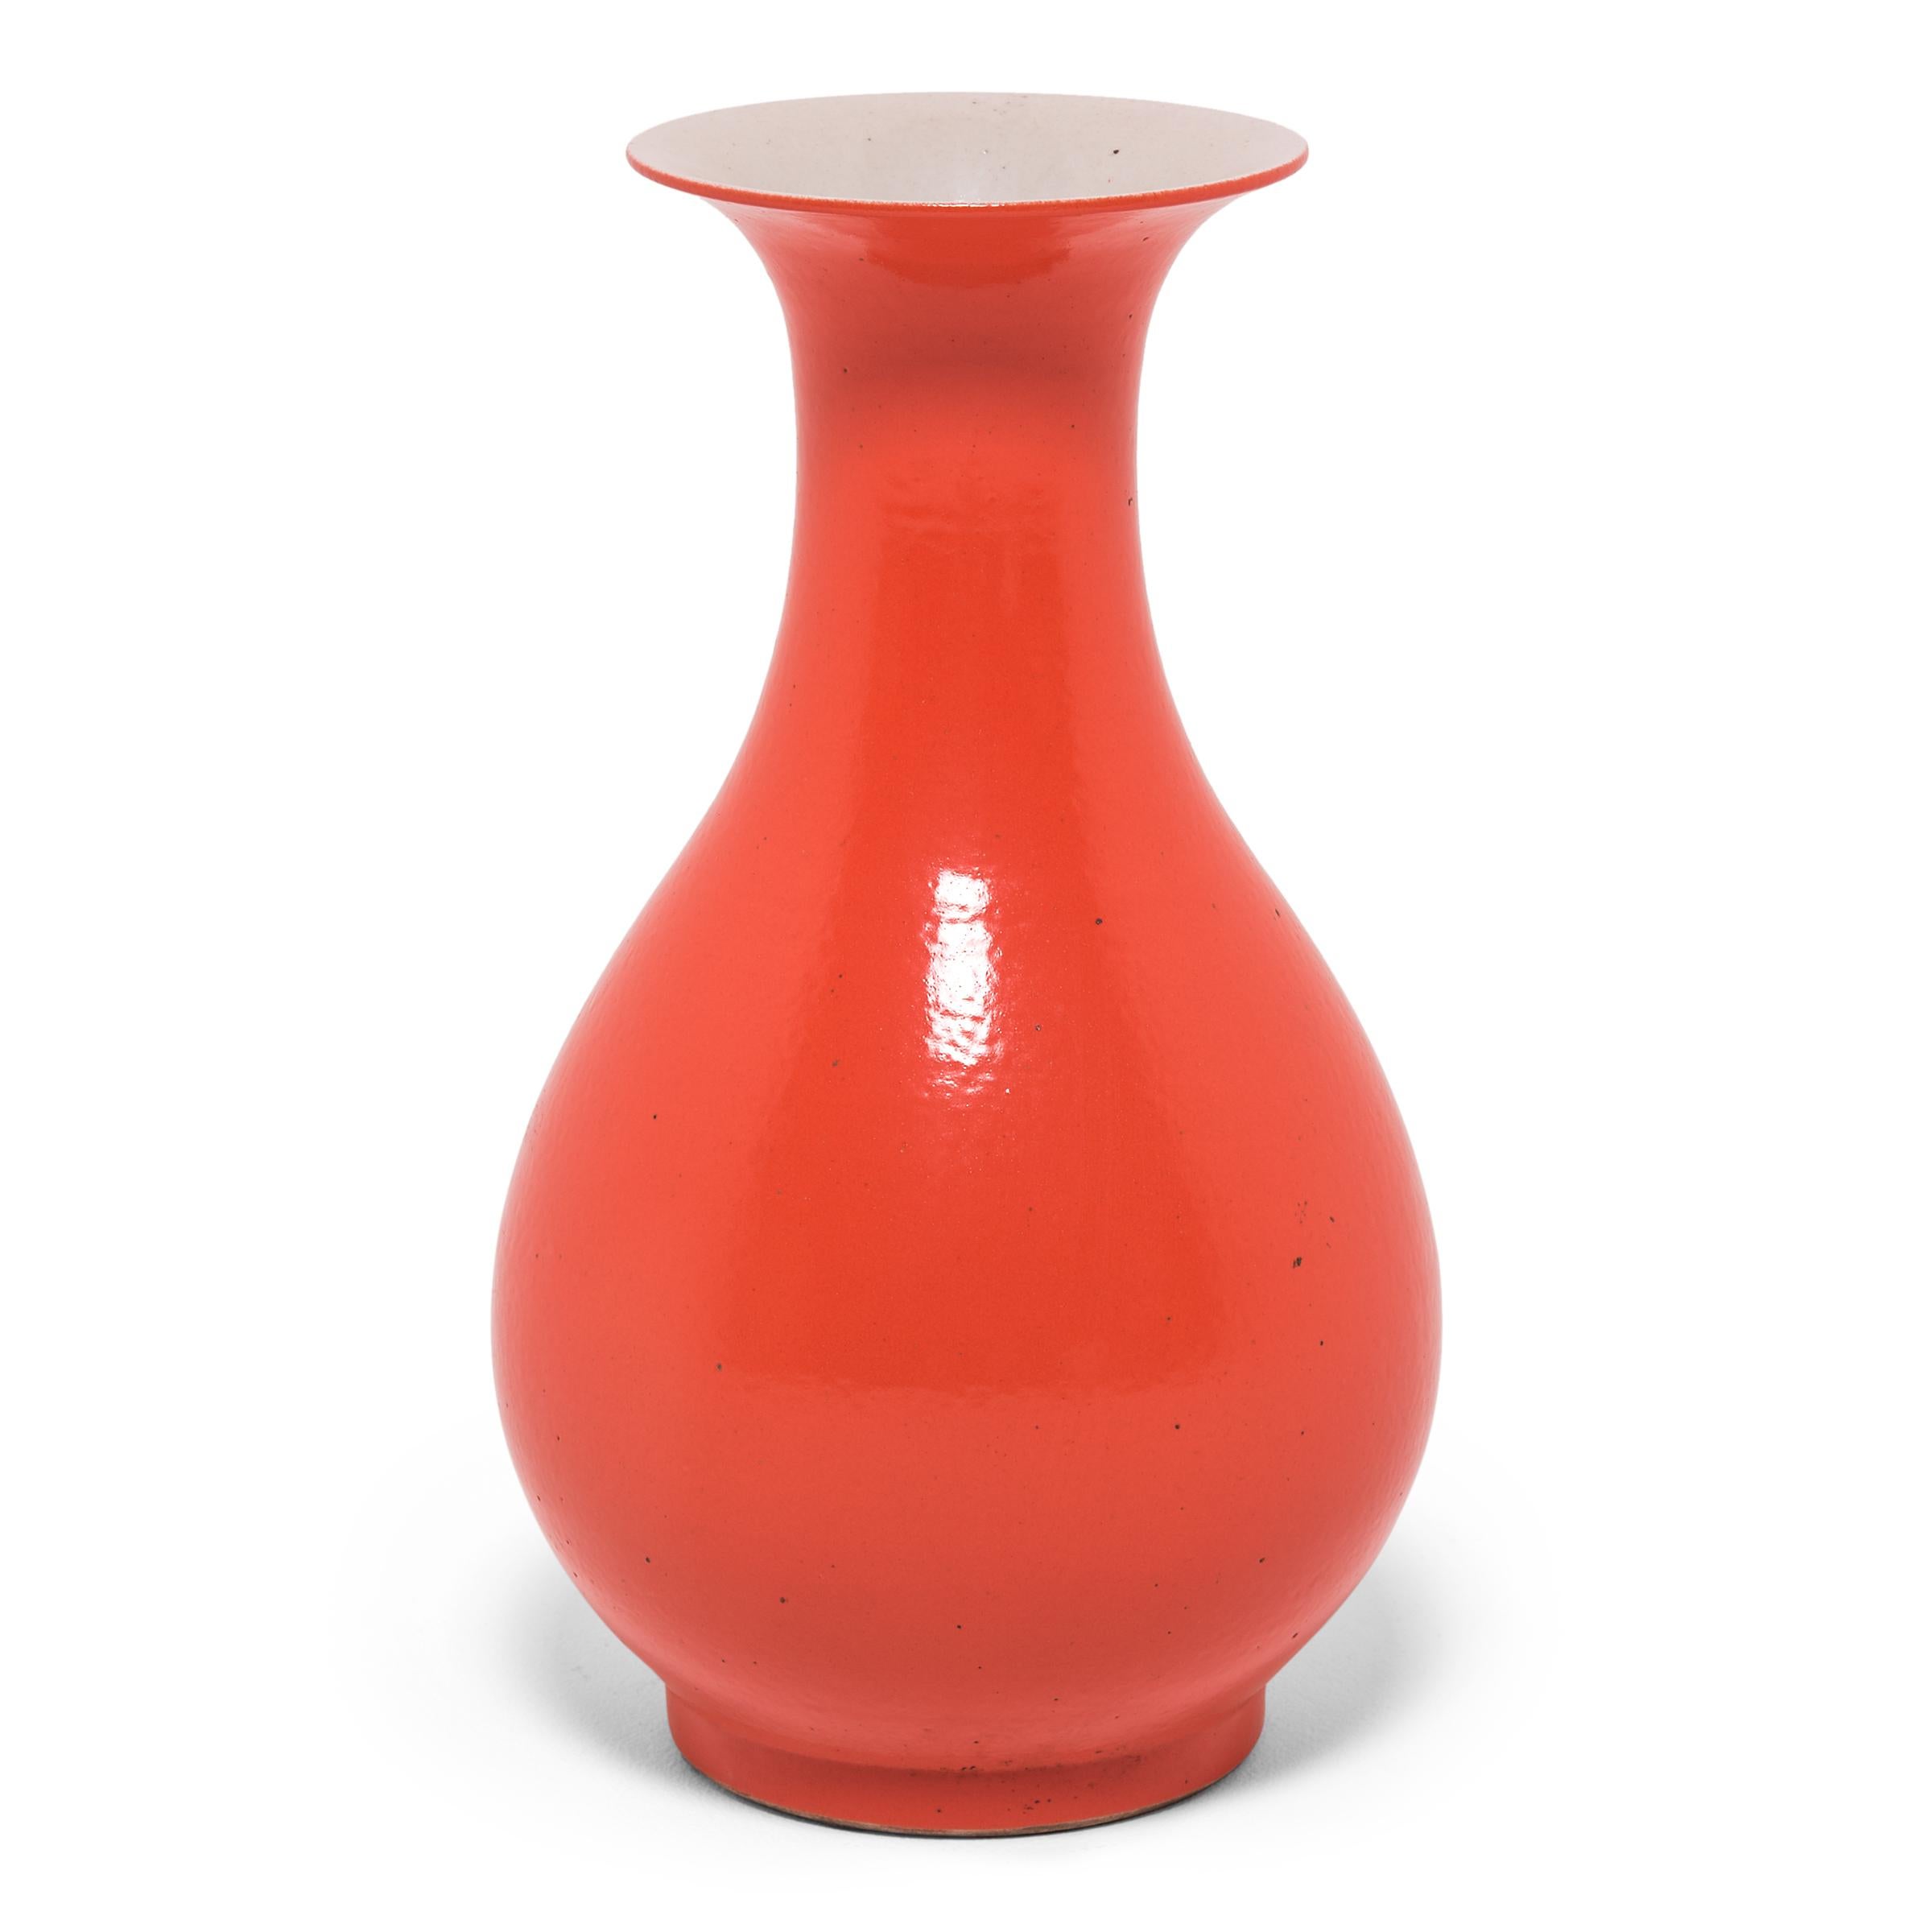 The striking monochrome of this vase draws on a long Chinese tradition of ceramics glazed in a single, statement-making color. The persimmon is an auspicious symbol in Chinese art, and this vibrant glaze brilliantly brings the fruit to life upon the